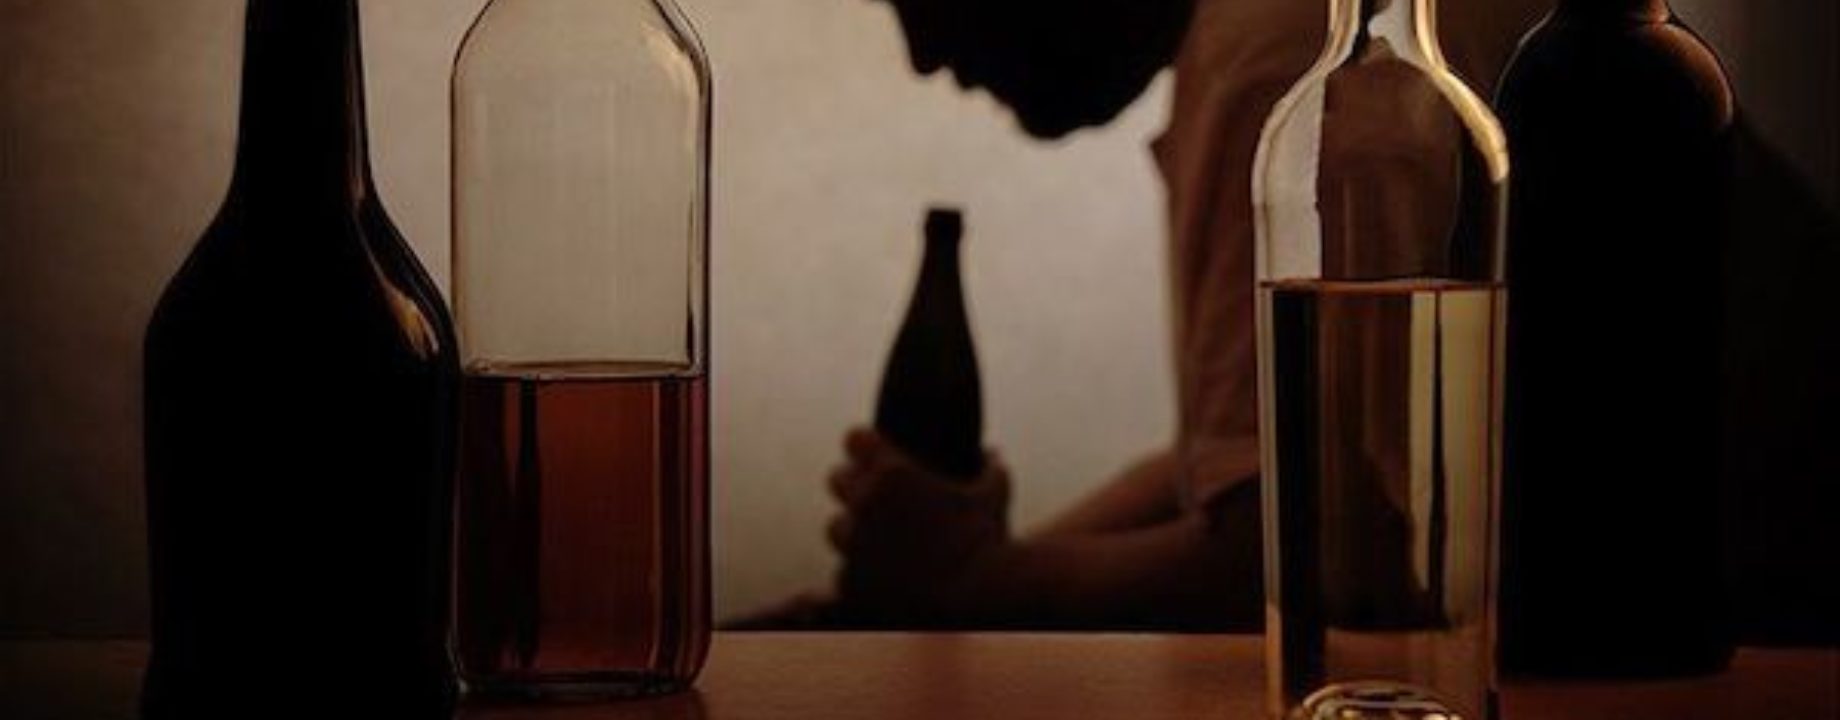 000057390 10 essential facts about alcohol abuse 722x406